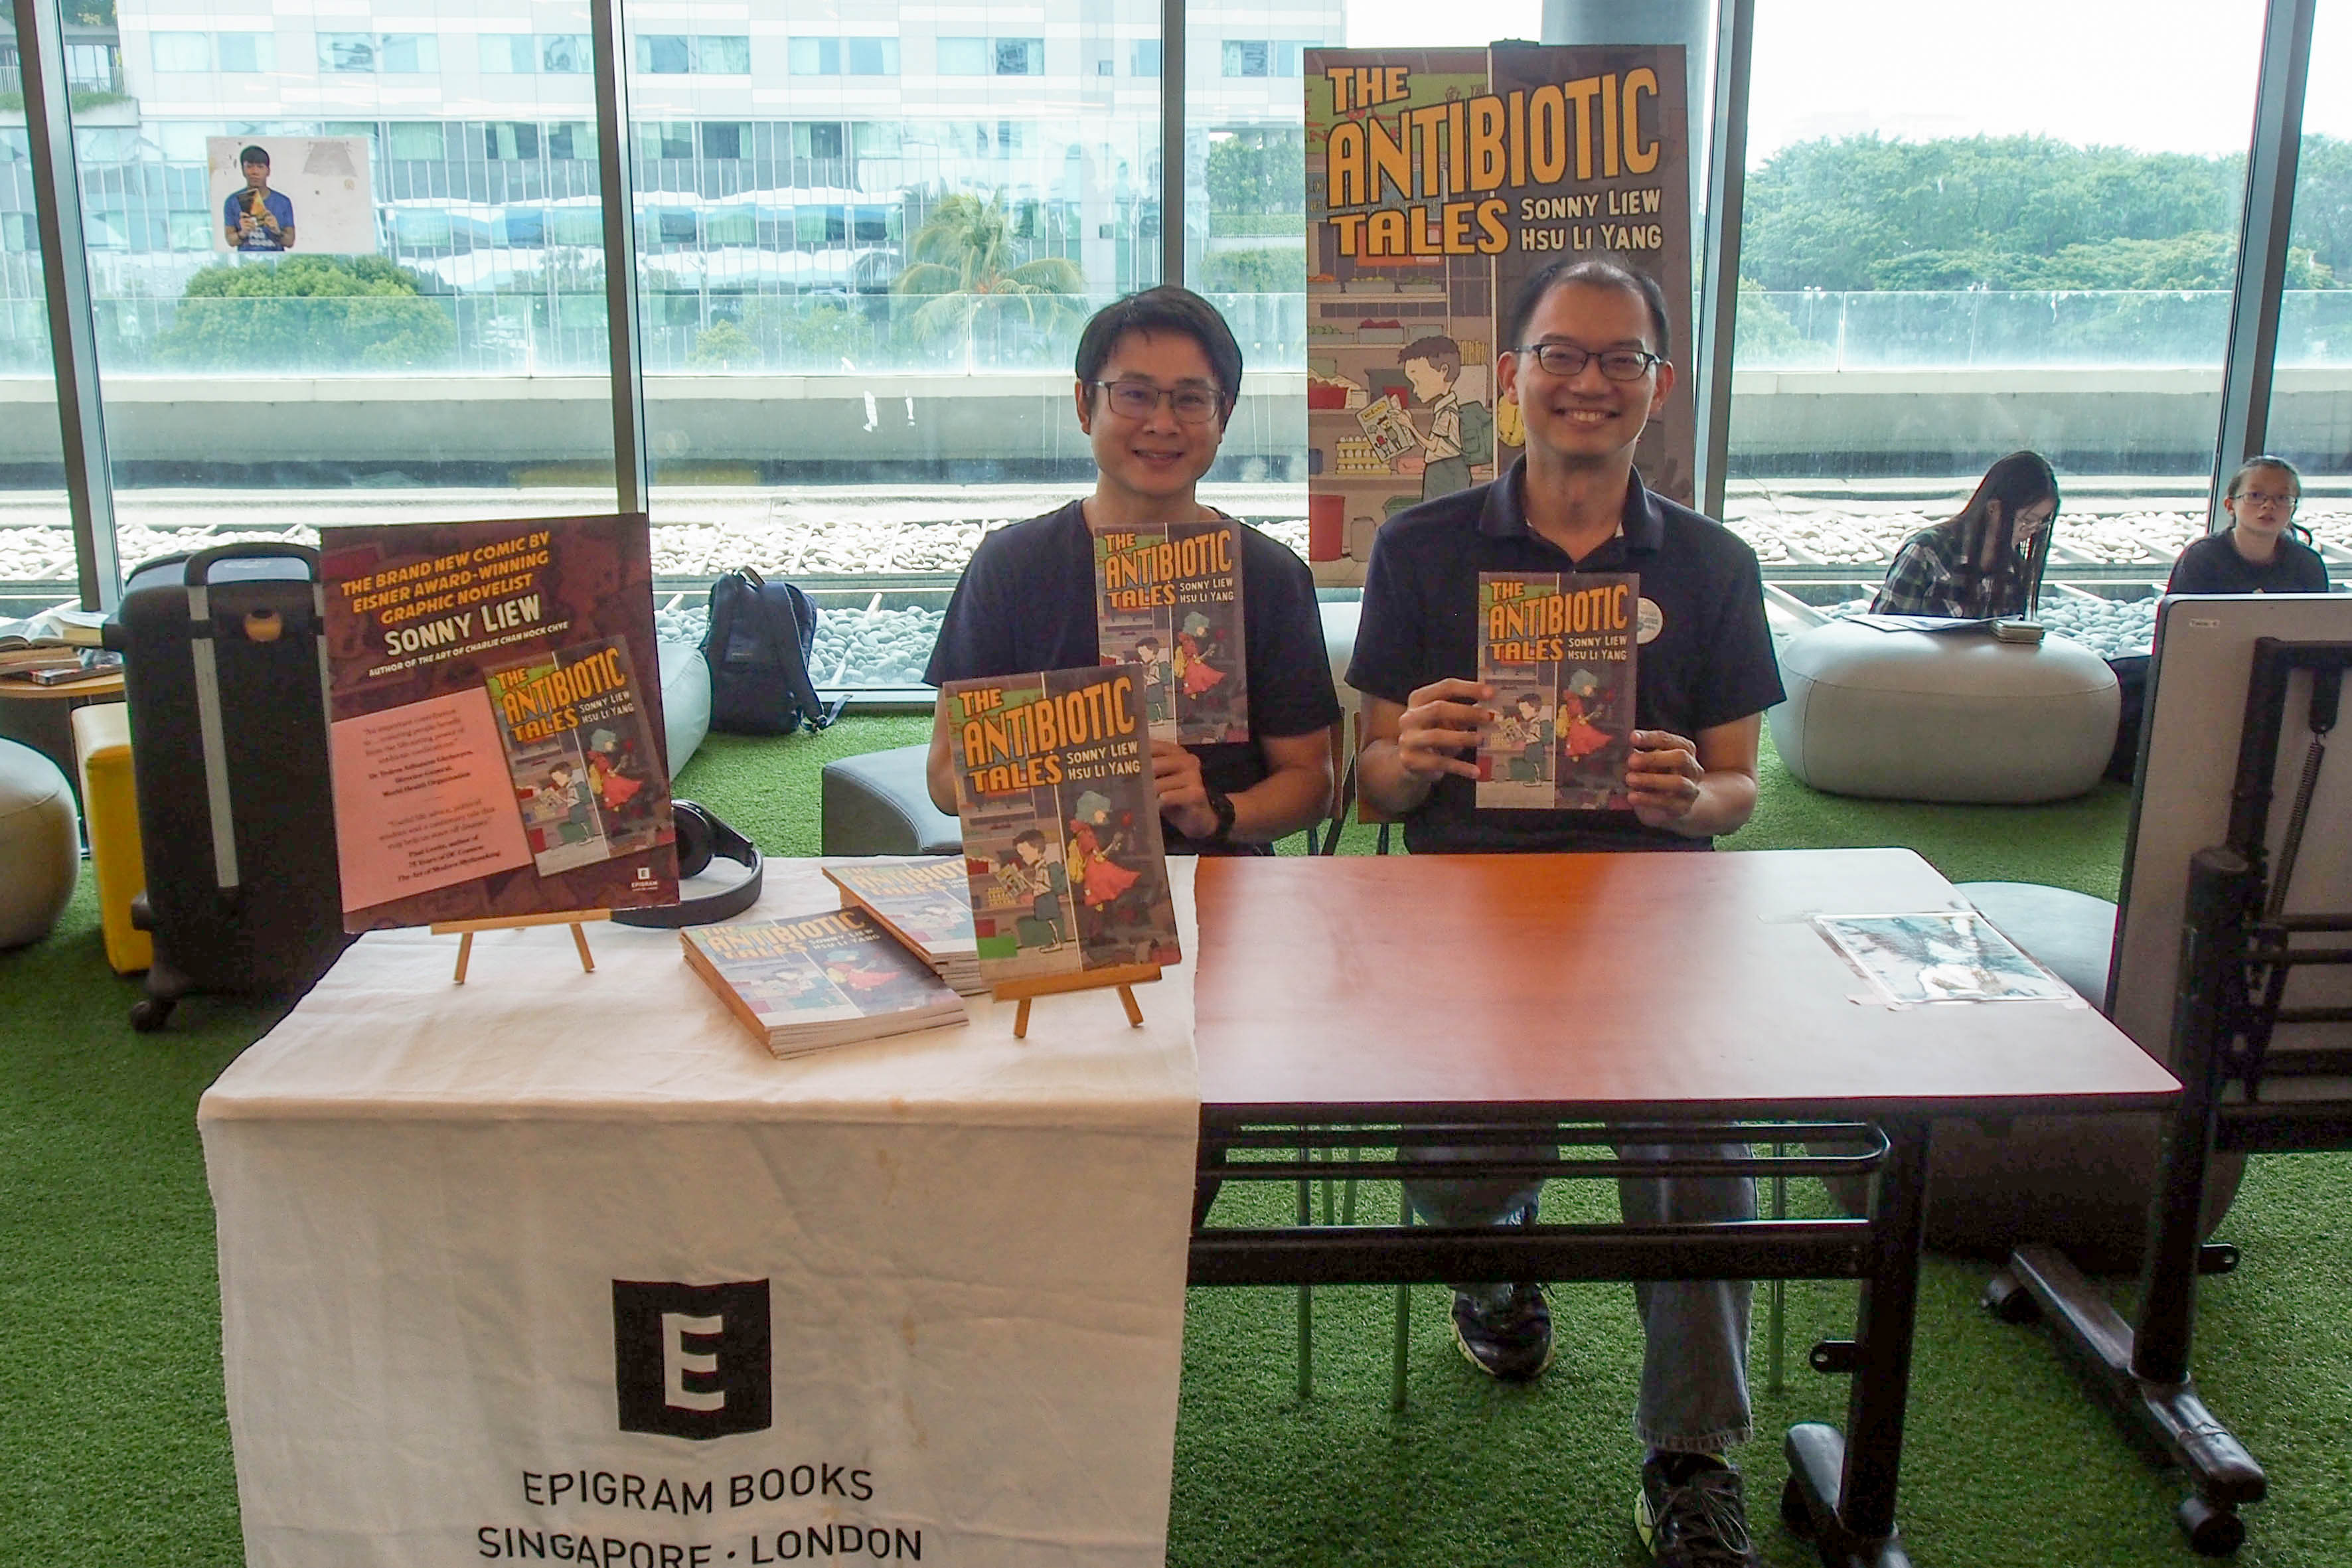 Sonny Liew and A/Prof Hsu Li Yang authored The Antibiotic Tales, a graphic novel on the dangers of antibiotic overuse and misuse.